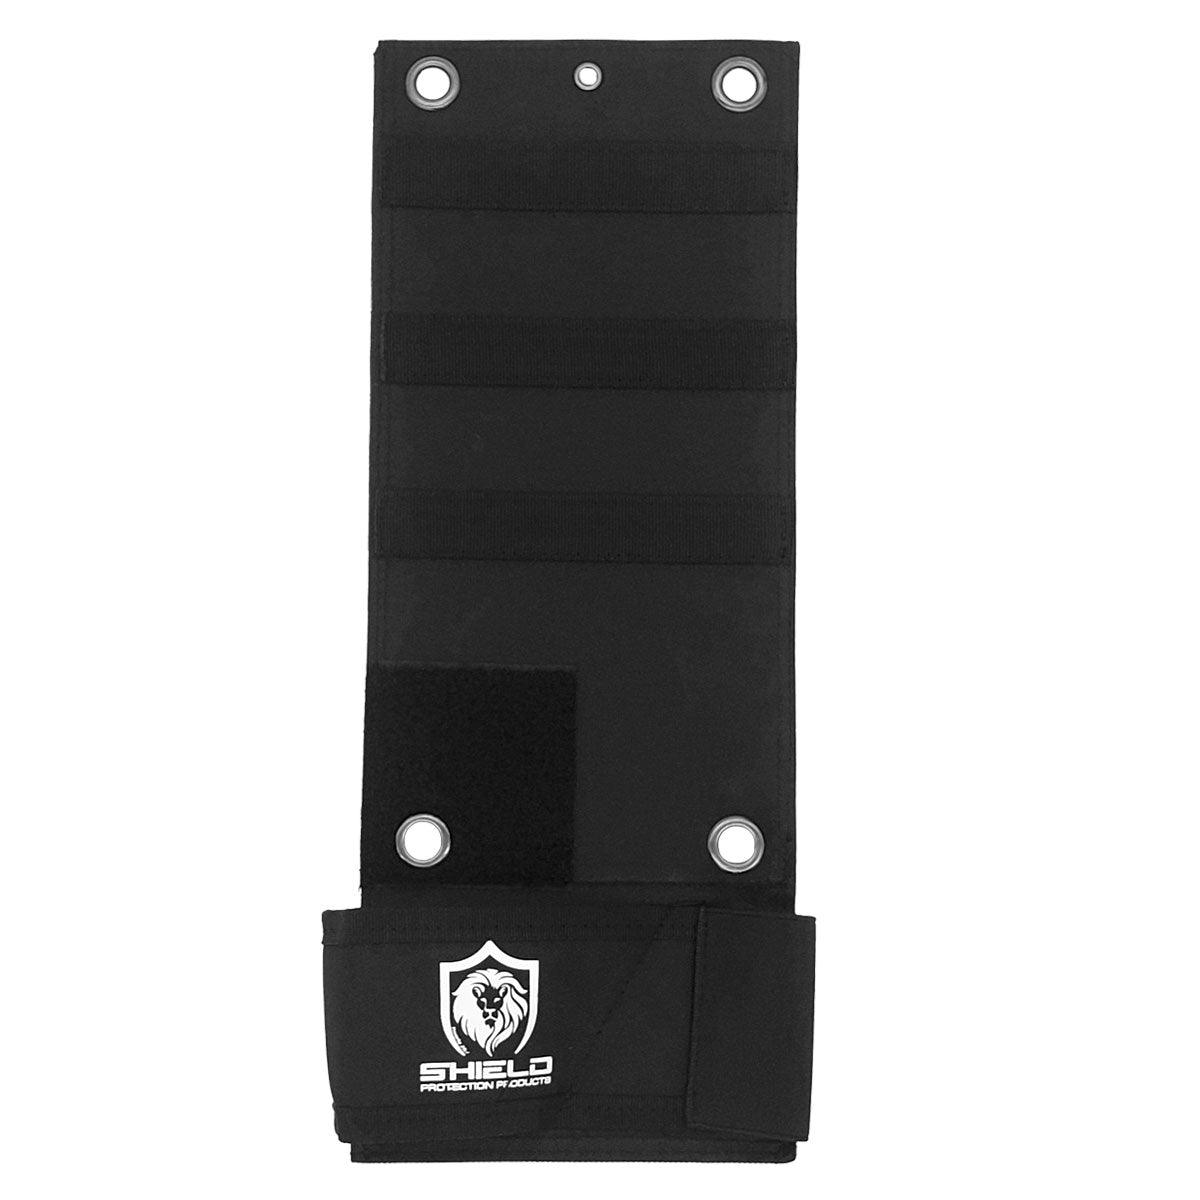 Shield Protection Products Bedside Holster Shield Protection Products LLC.